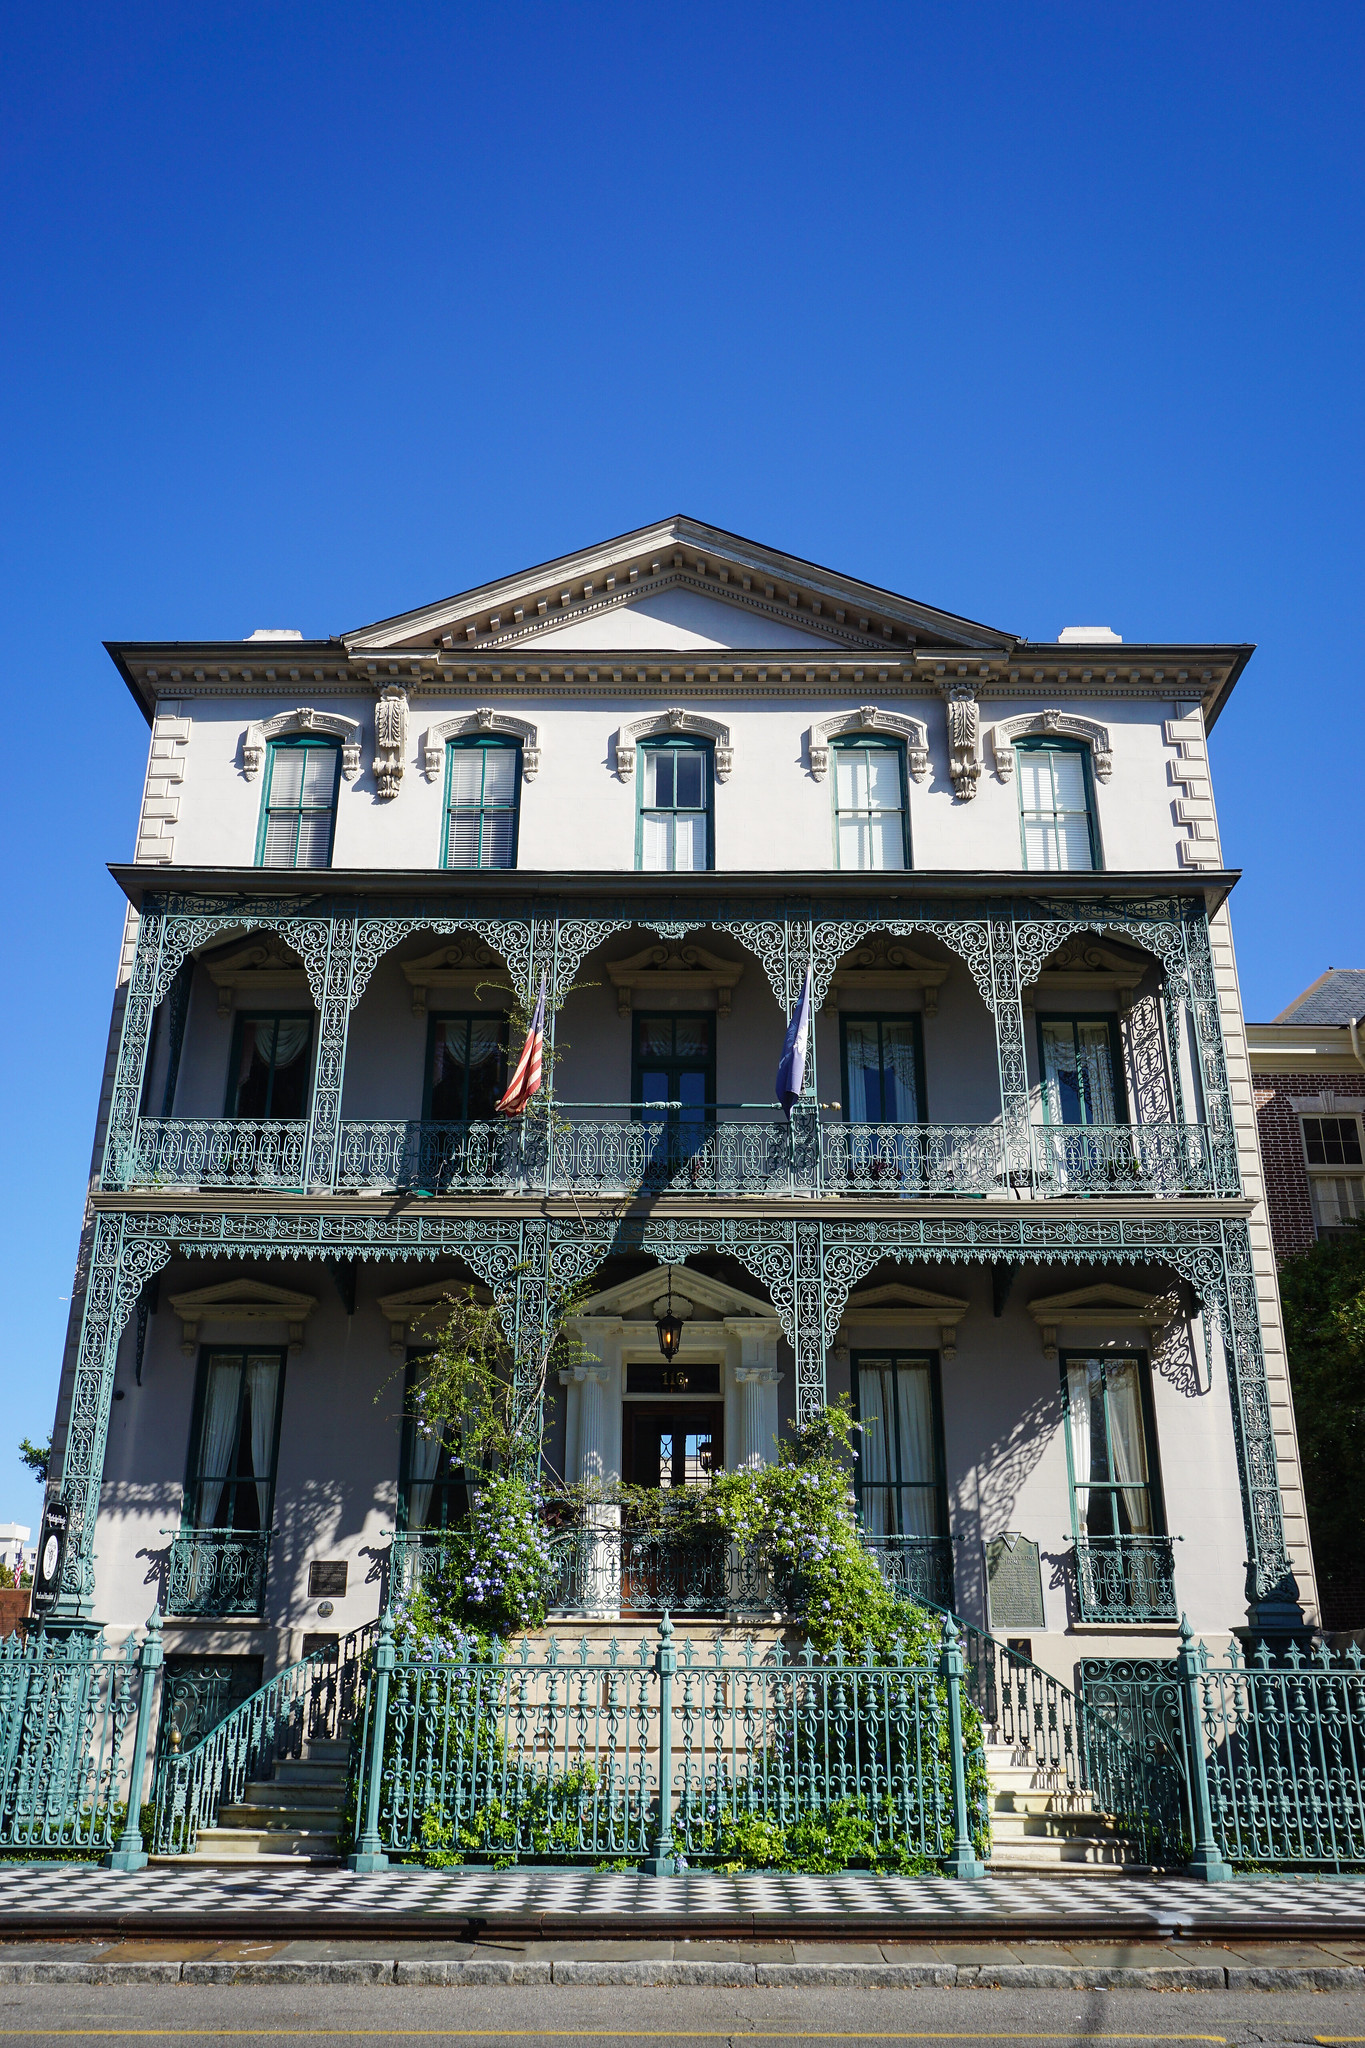 John Rutledge House | | A First Timer's Guide to 3 Days in Charleston South Carolina | What to do in Charleston | Charleston Travel Guide | Best Things to do in Charleston | Best Places to Visit in Charleston